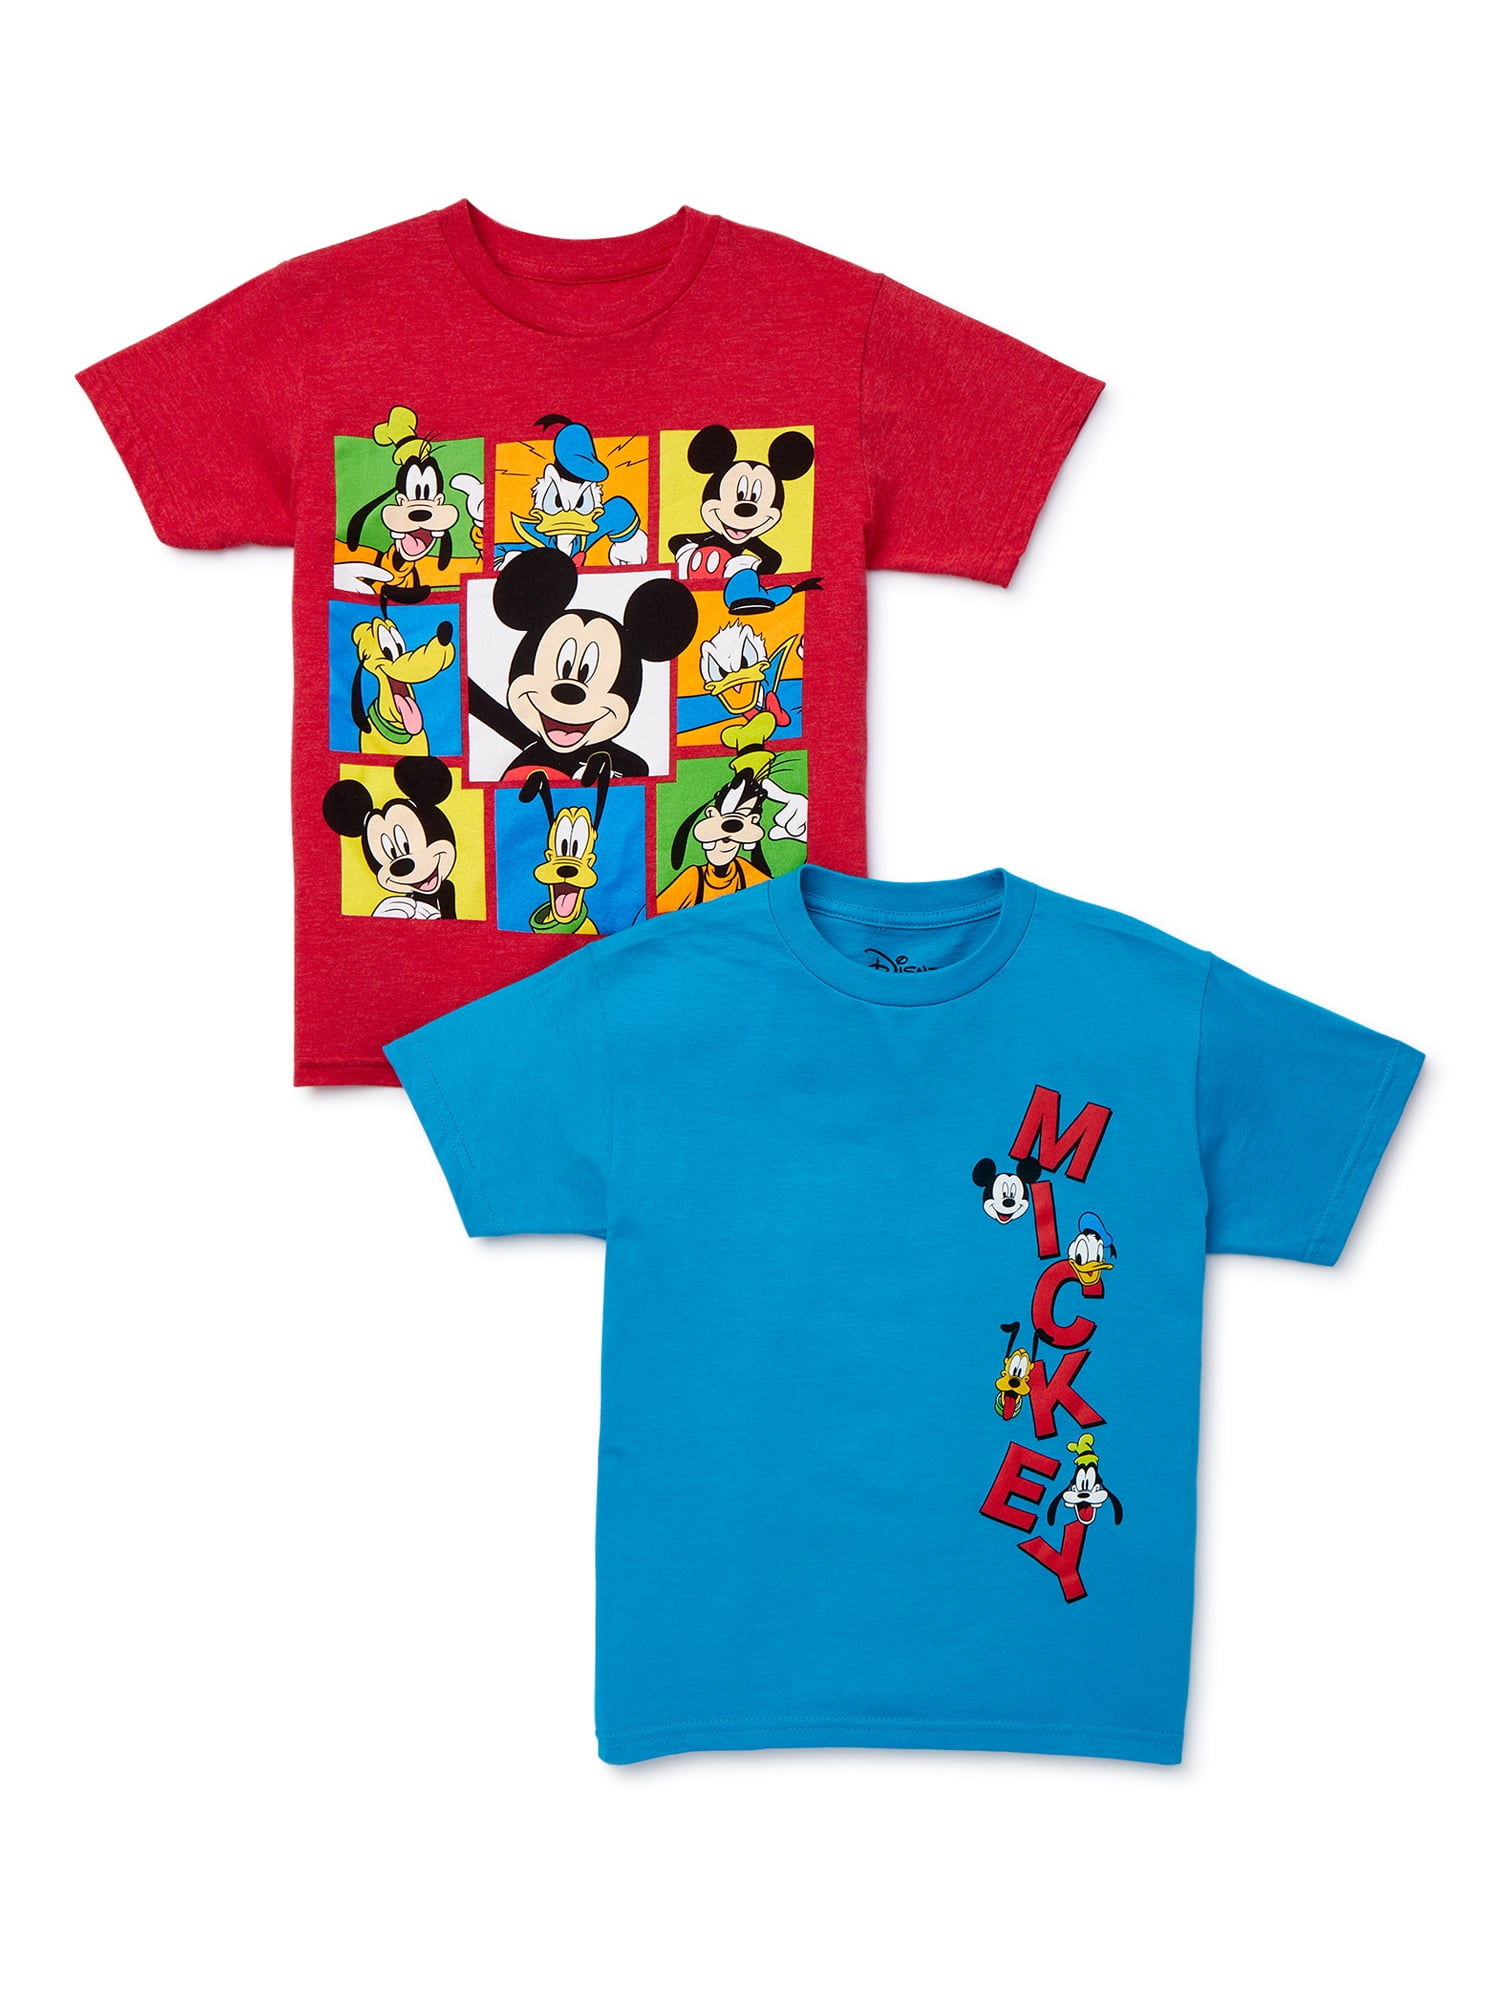 4-18 T-Shirt, Friends Always Sizes Boys Disney Down Mickey Mouse Graphic 2-Pack,